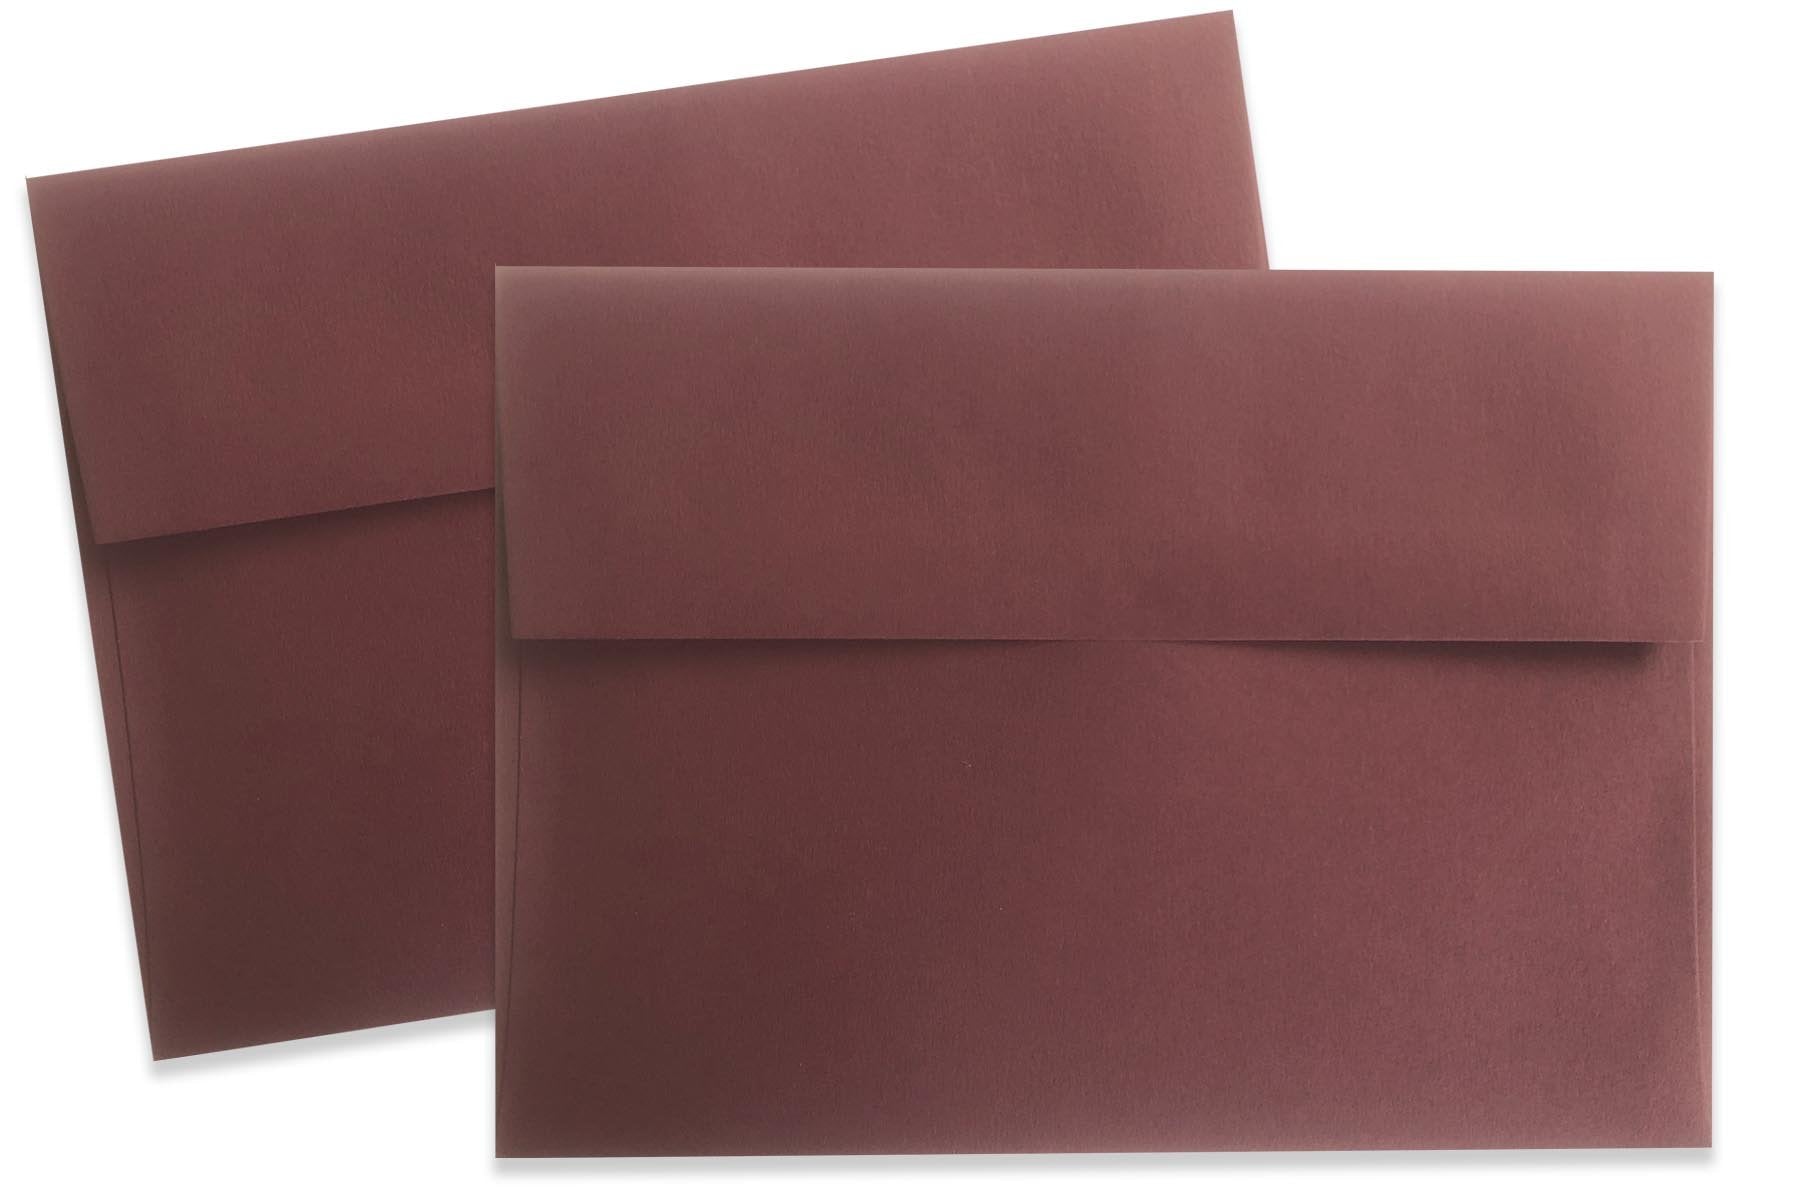 Colorful Envelopes 5 x 7 Assorted Colors 105 Pack Envelopes for Invitations, Birthday, Graduation, Baby Shower, Greeting Card